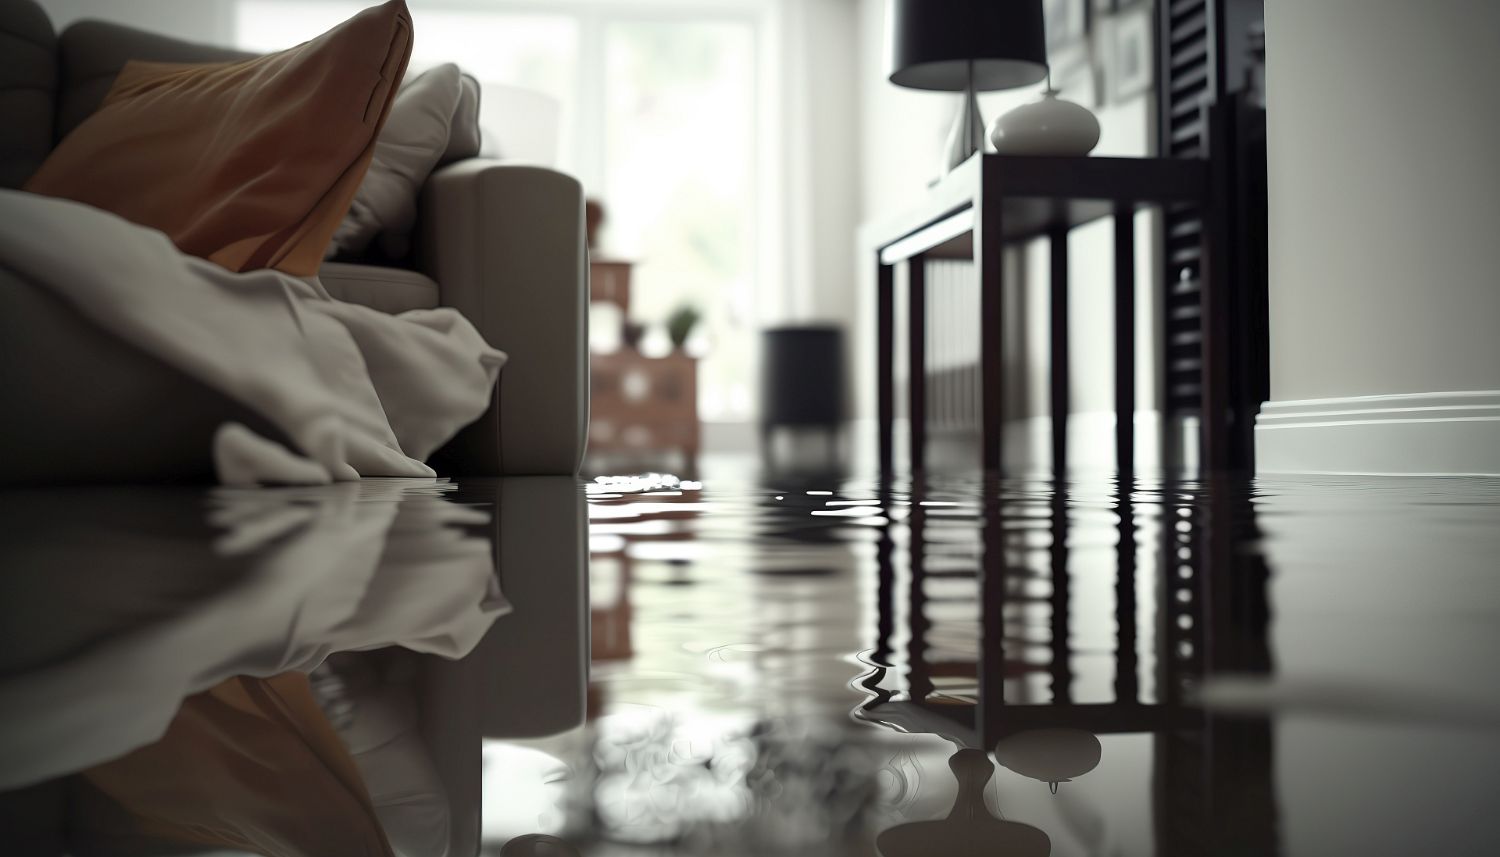 An image of a flooded home